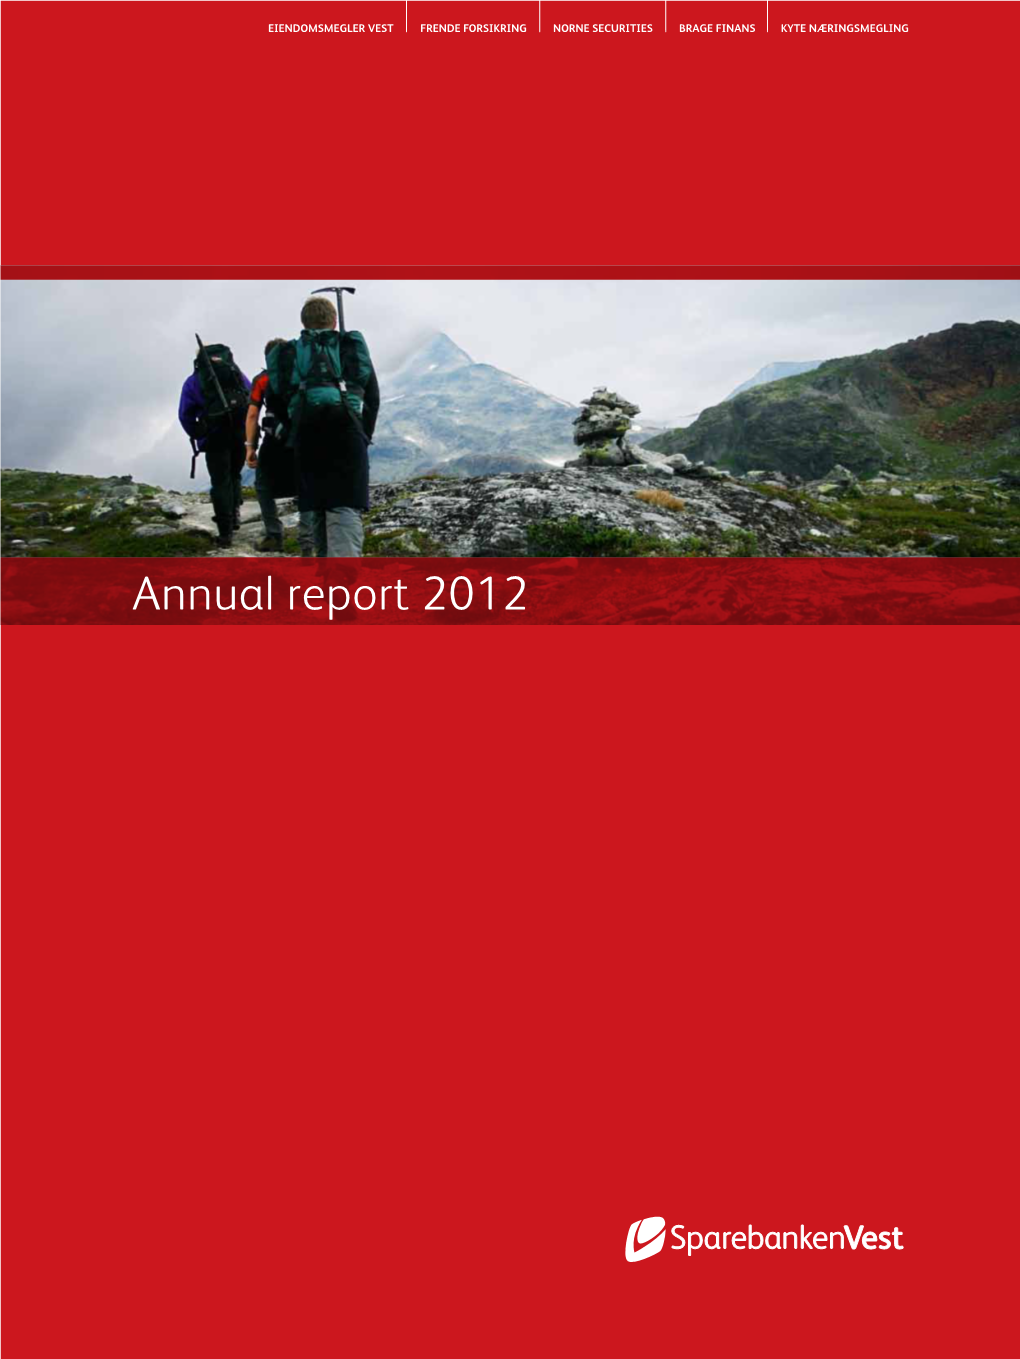 Annual Report 2012 Sparebanken Vest Shall Be a Driving Force in Social and Commercial Development in Western Norway